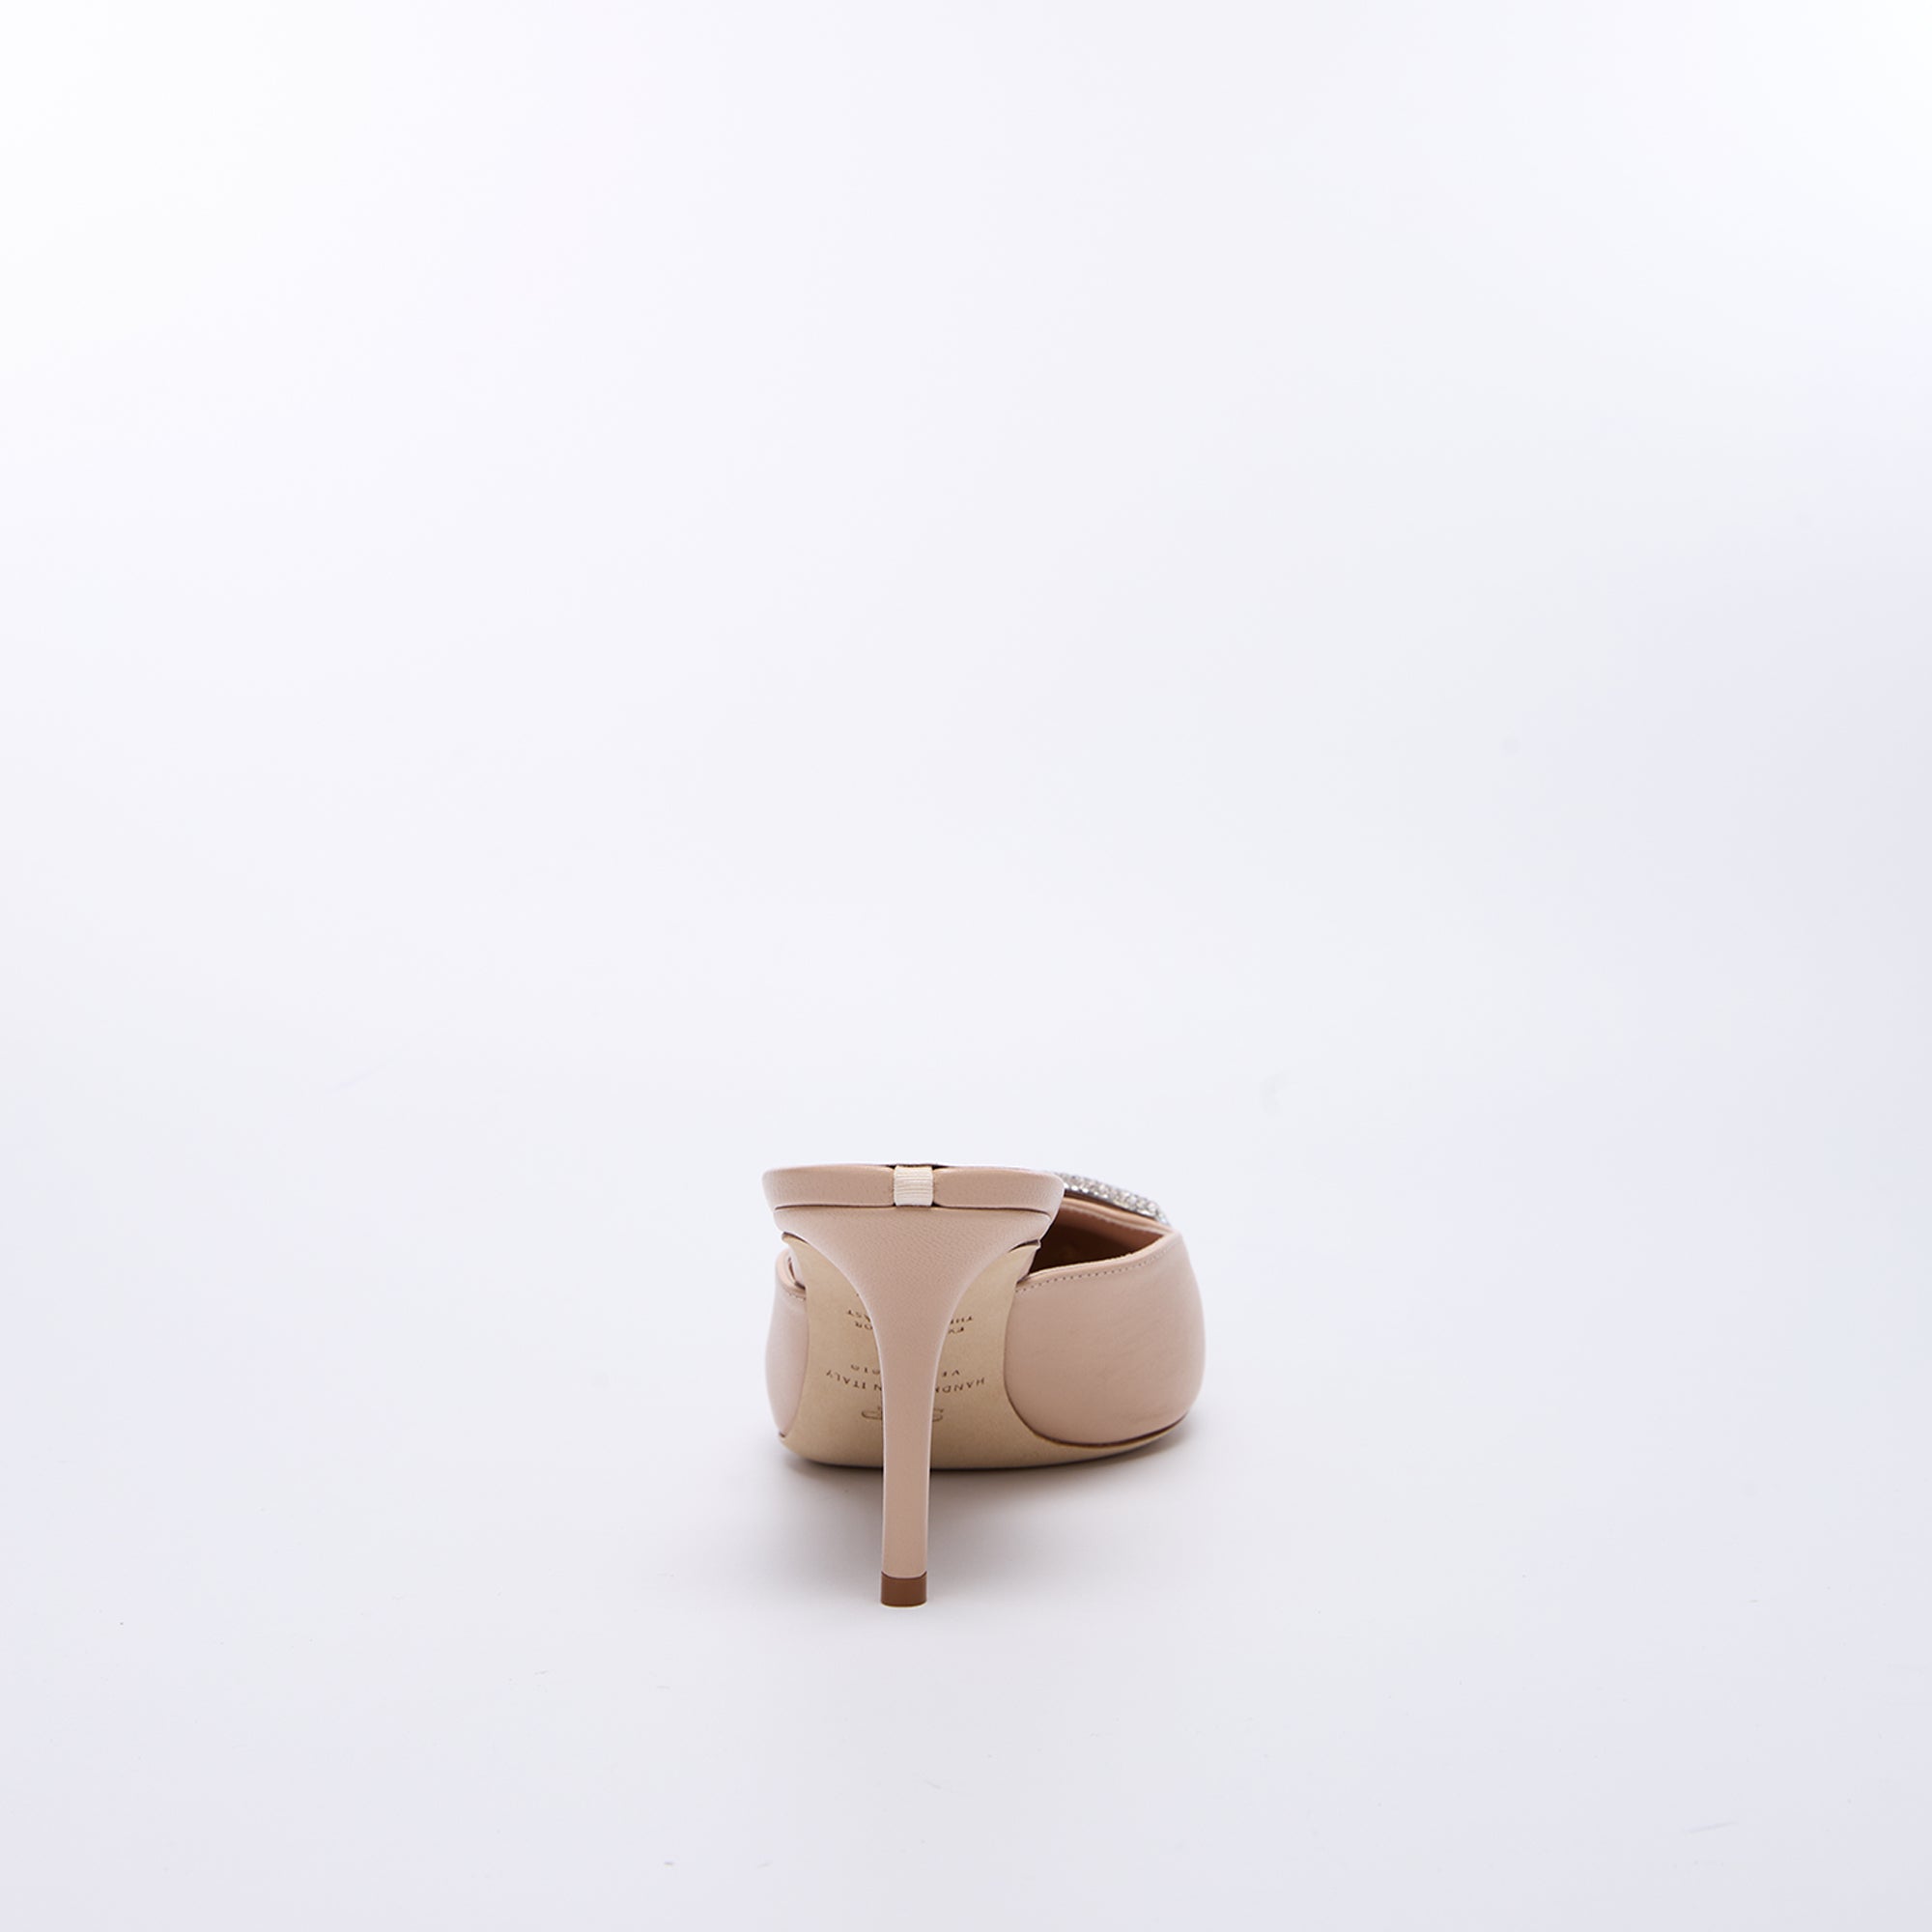 SJP by Sarah Jessica Parker Noble 70mm Beige Leather Mules